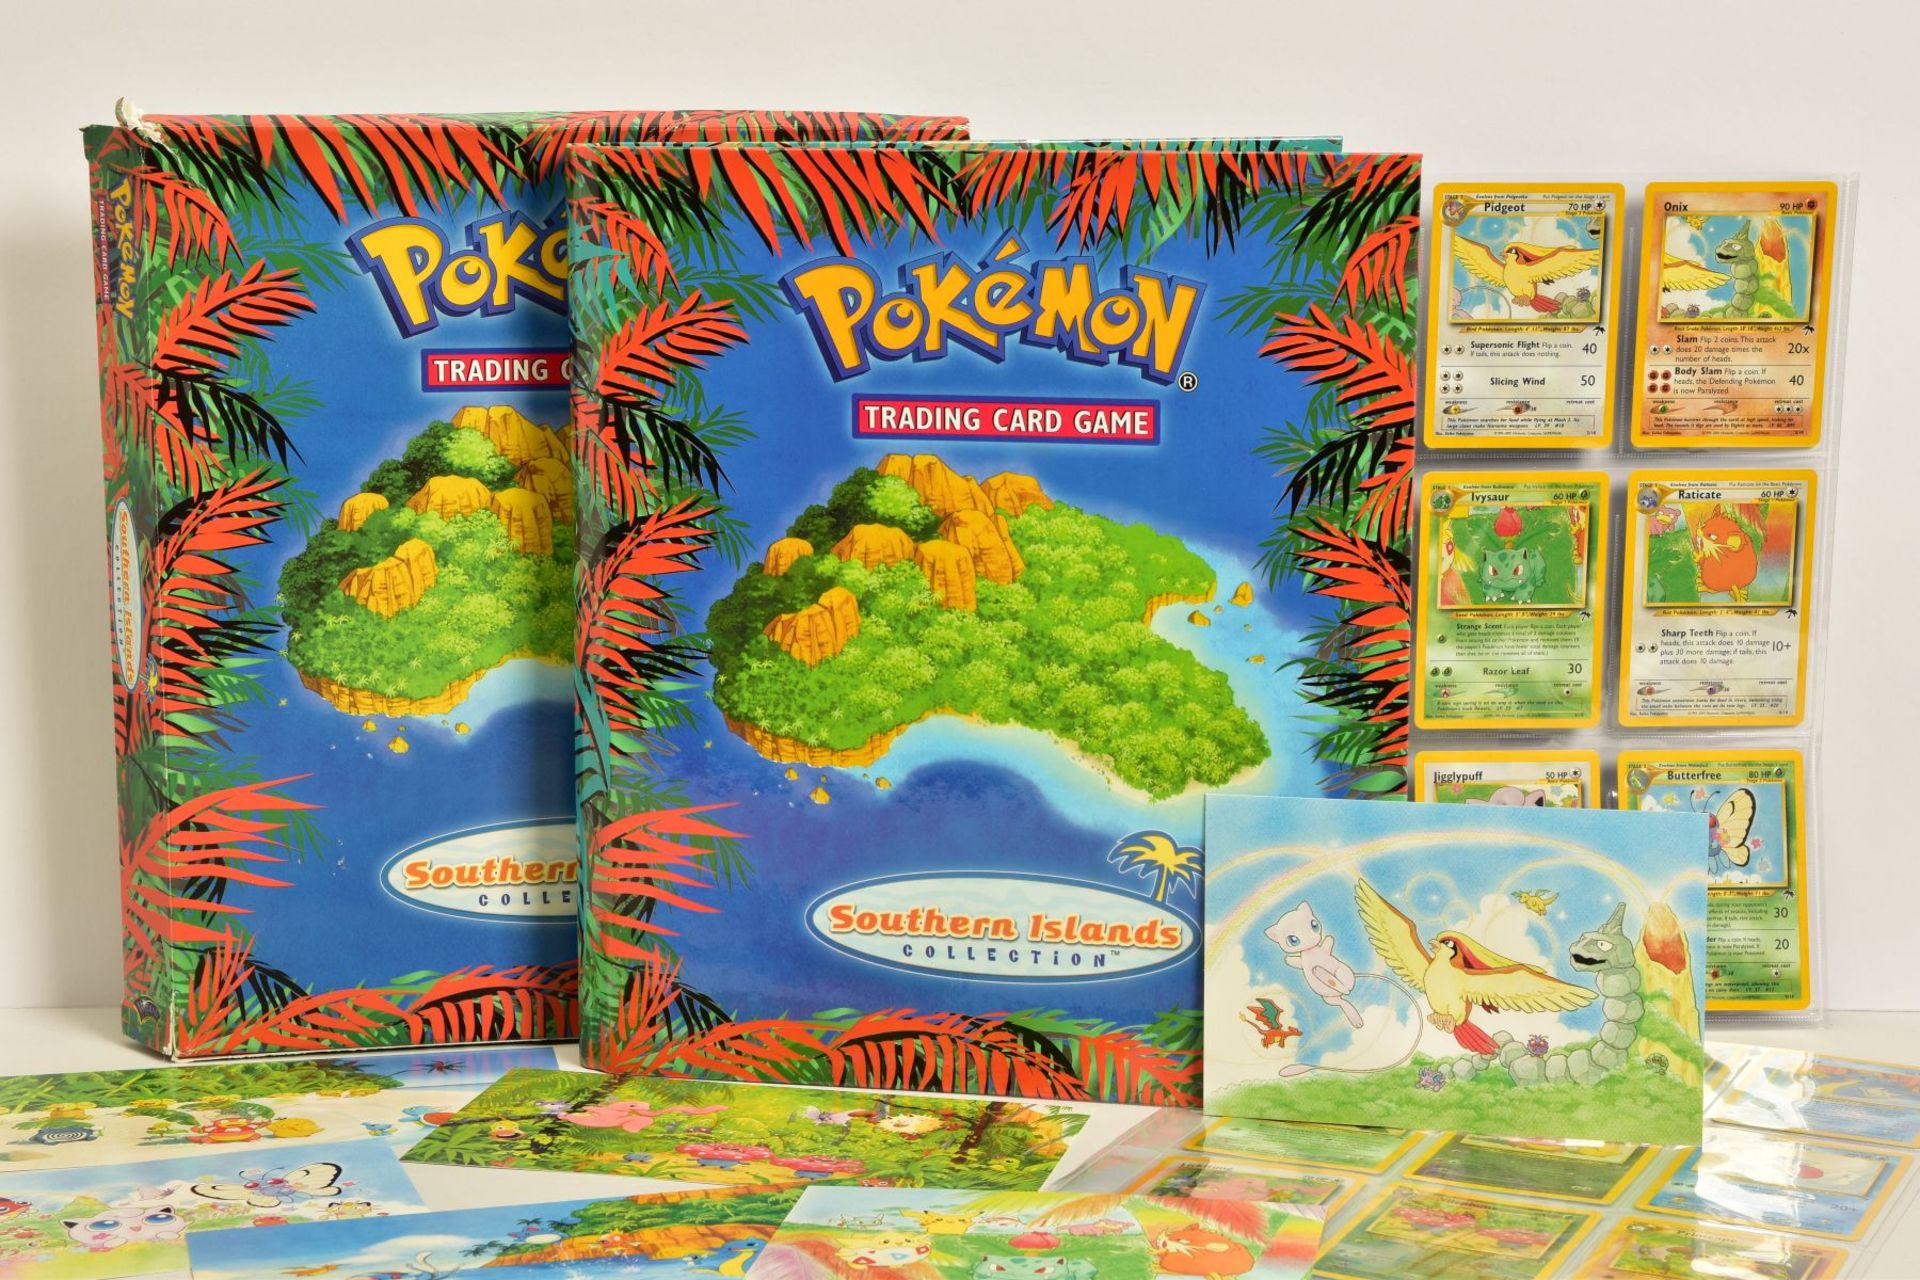 A COMPLETE POKEMON SOUTHERN ISLANDS COLLECTION CARD SET, in original presentation folder with